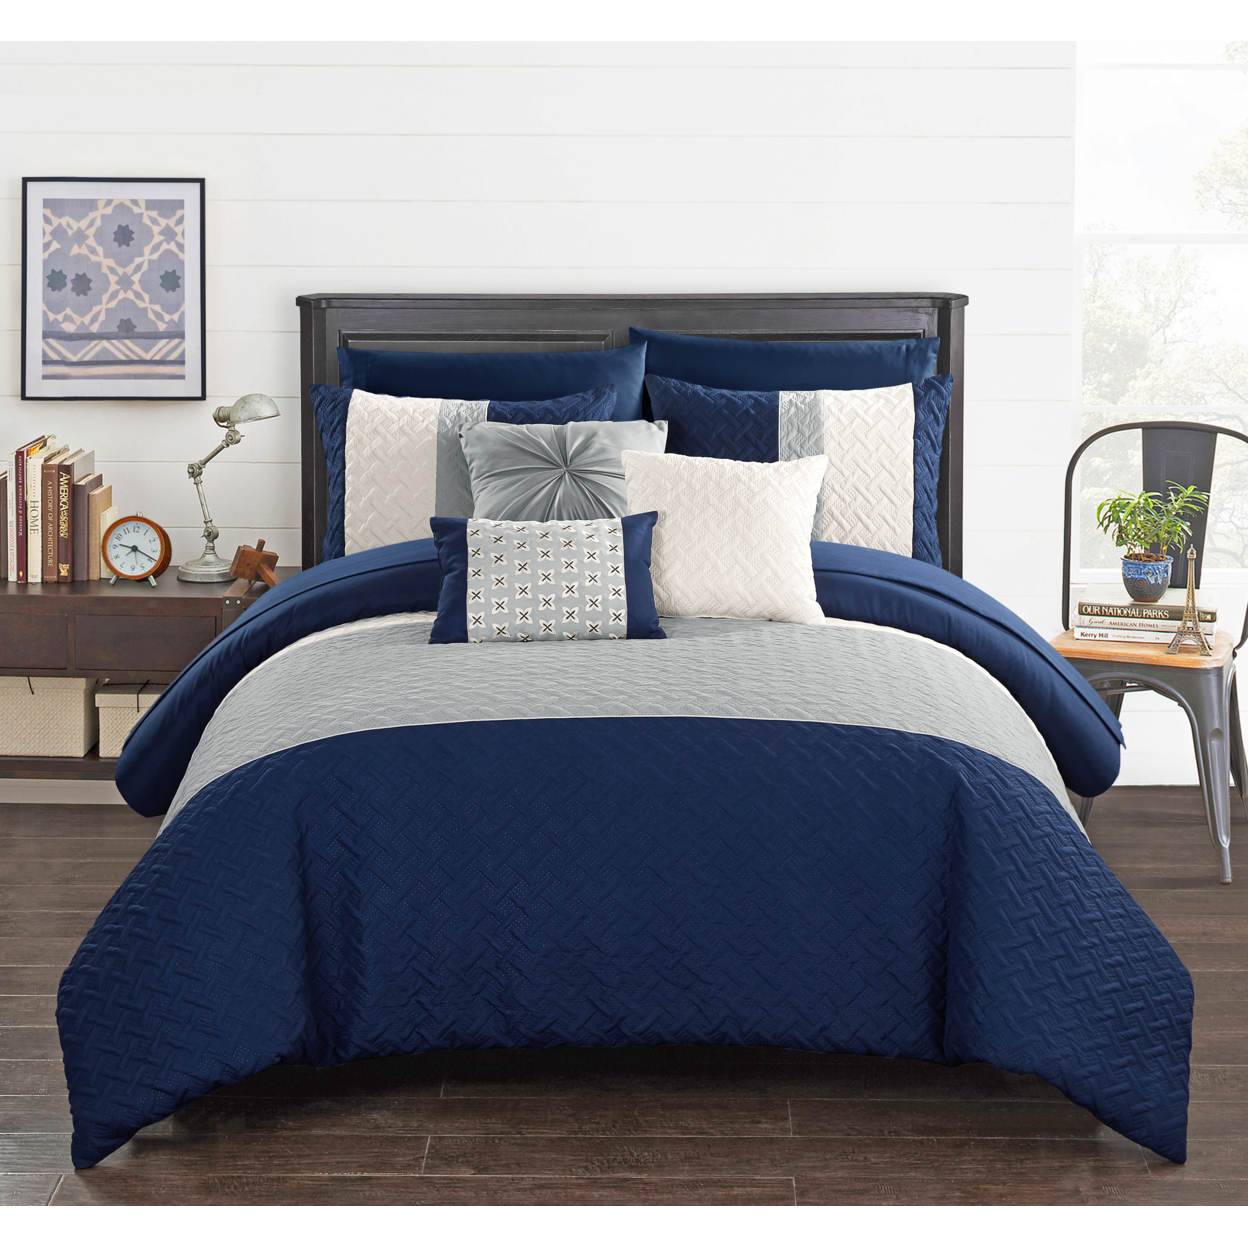 Chic Home Shaila 10 or 8 Piece Comforter Set Color Block Quilted Embroidered Design Bed in a Bag Bedding - Navy, Queen - queen navy blue